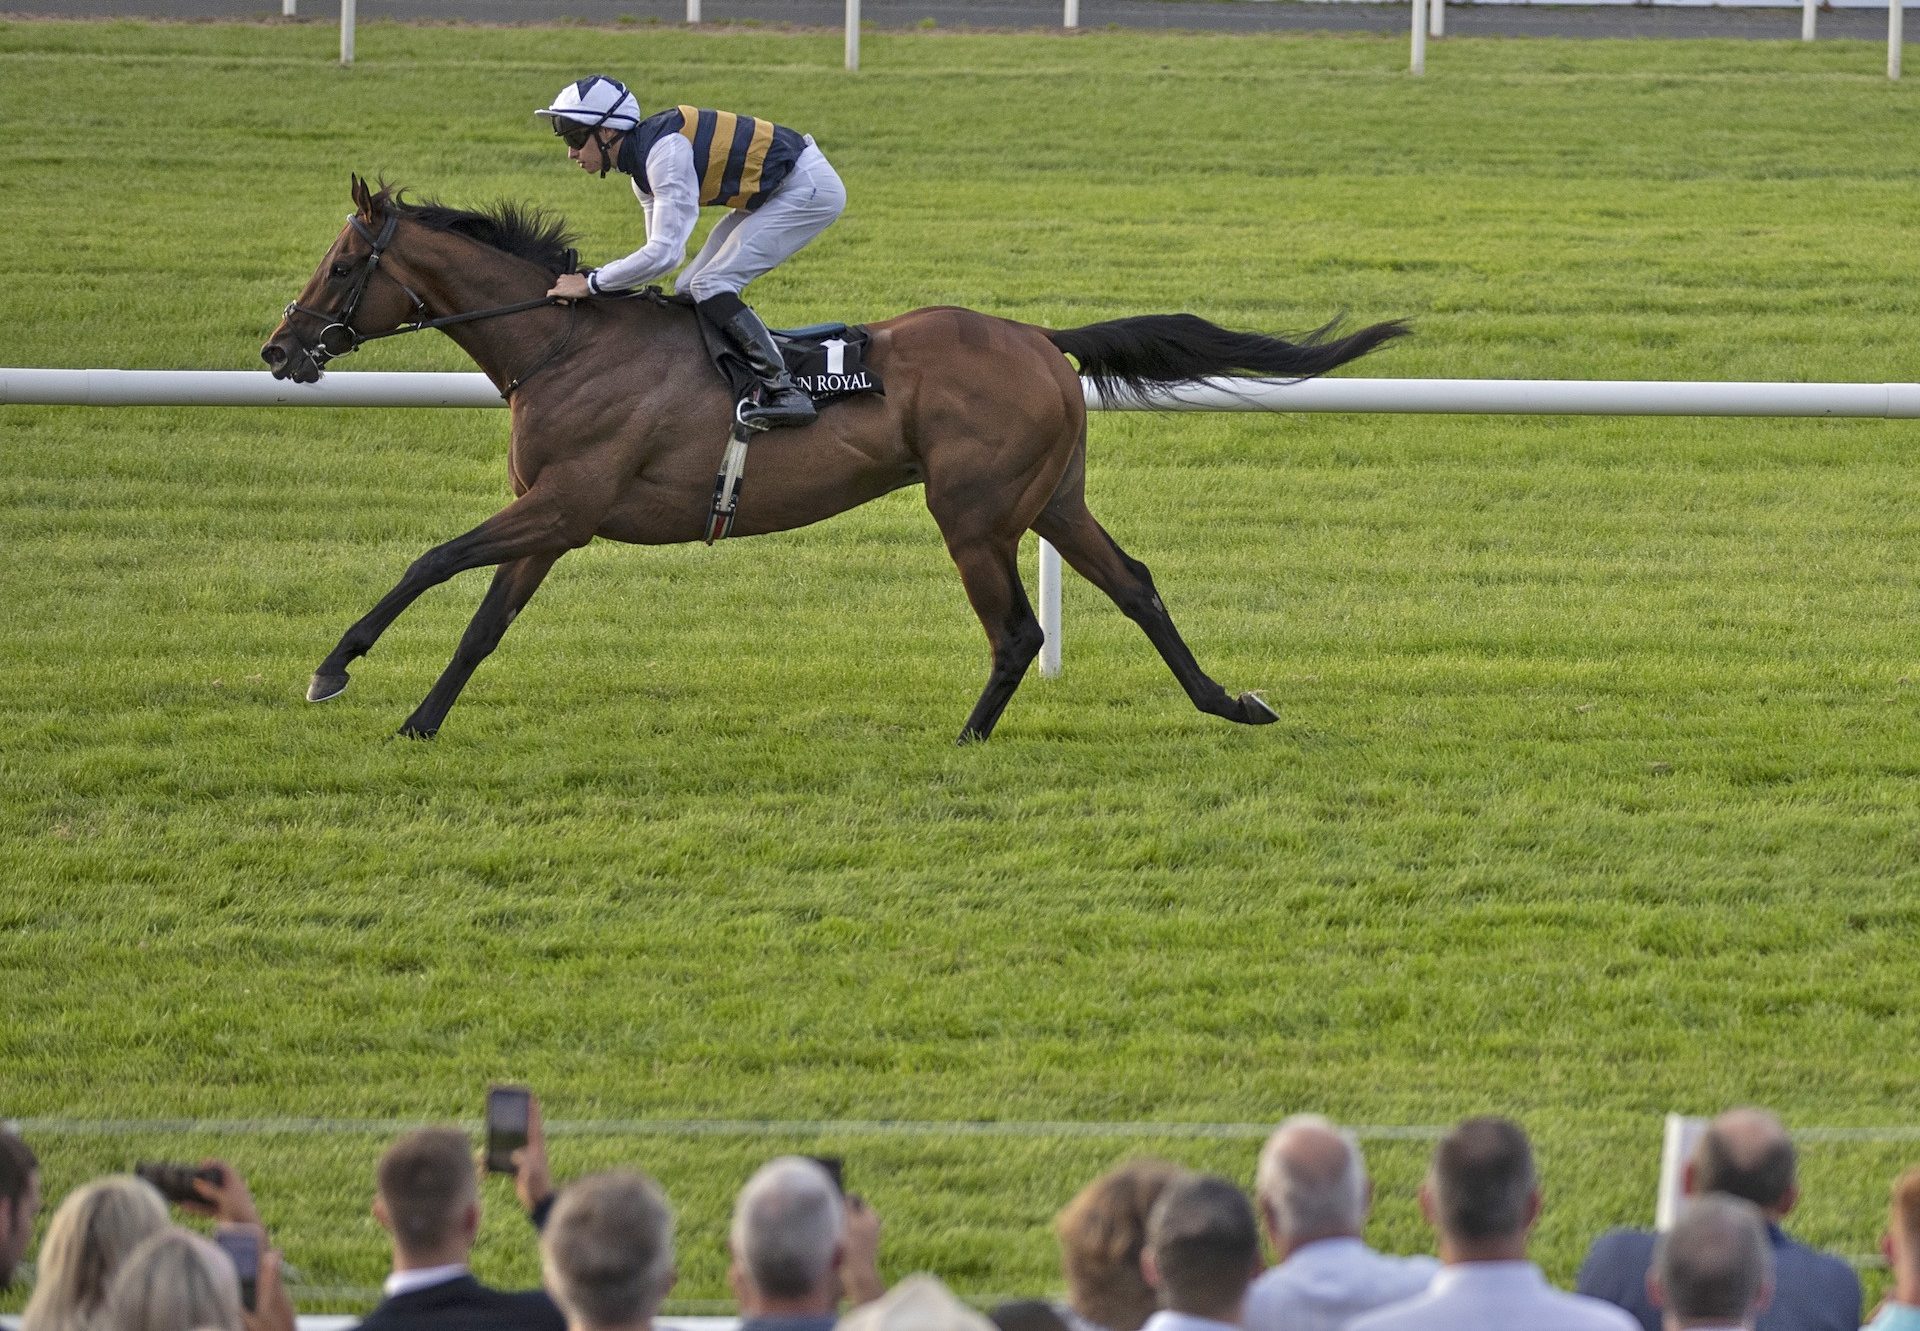 Downdraft (Camelot) winning the Listed Her Majesty's Plate at Down Royal